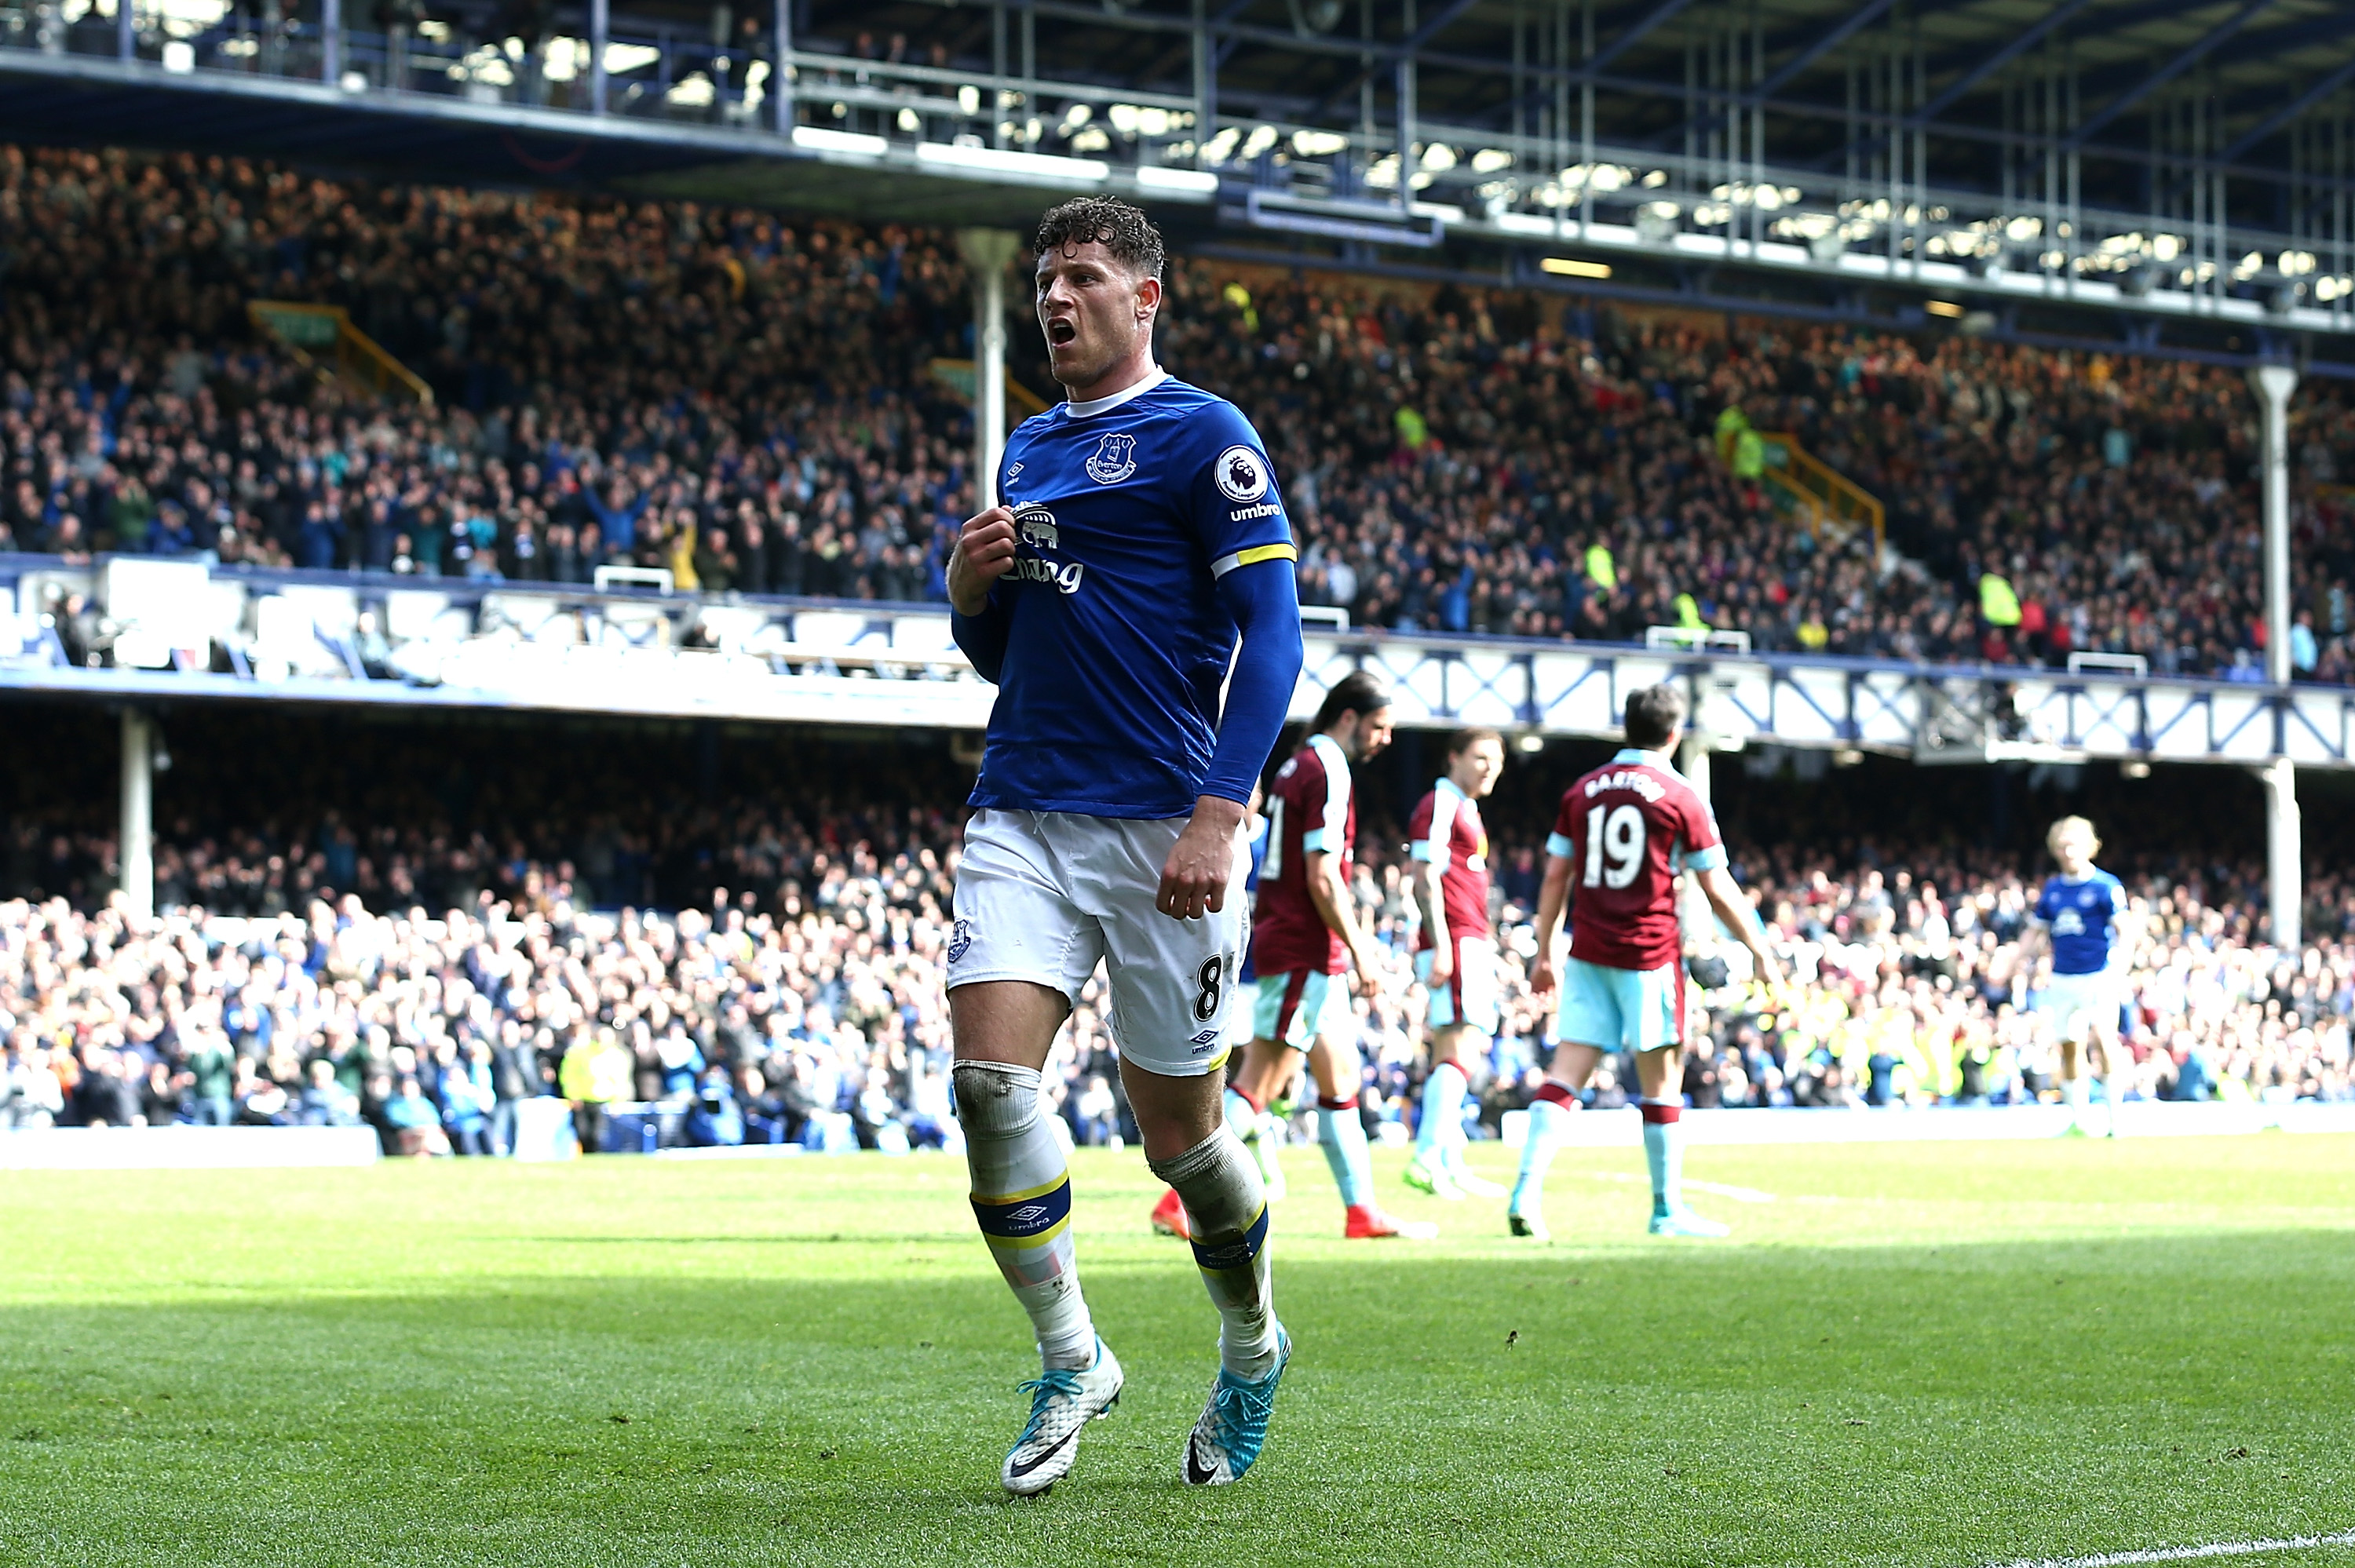 LIVERPOOL, ENGLAND - APRIL 15:  Ross Barkley of Everton celebrates as Ben Mee of Burnley (not pictured) scored a own goal for Everton's second during the Premier League match between Everton and Burnley at Goodison Park on April 15, 2017 in Liverpool, England.  (Photo by Jan Kruger/Getty Images)